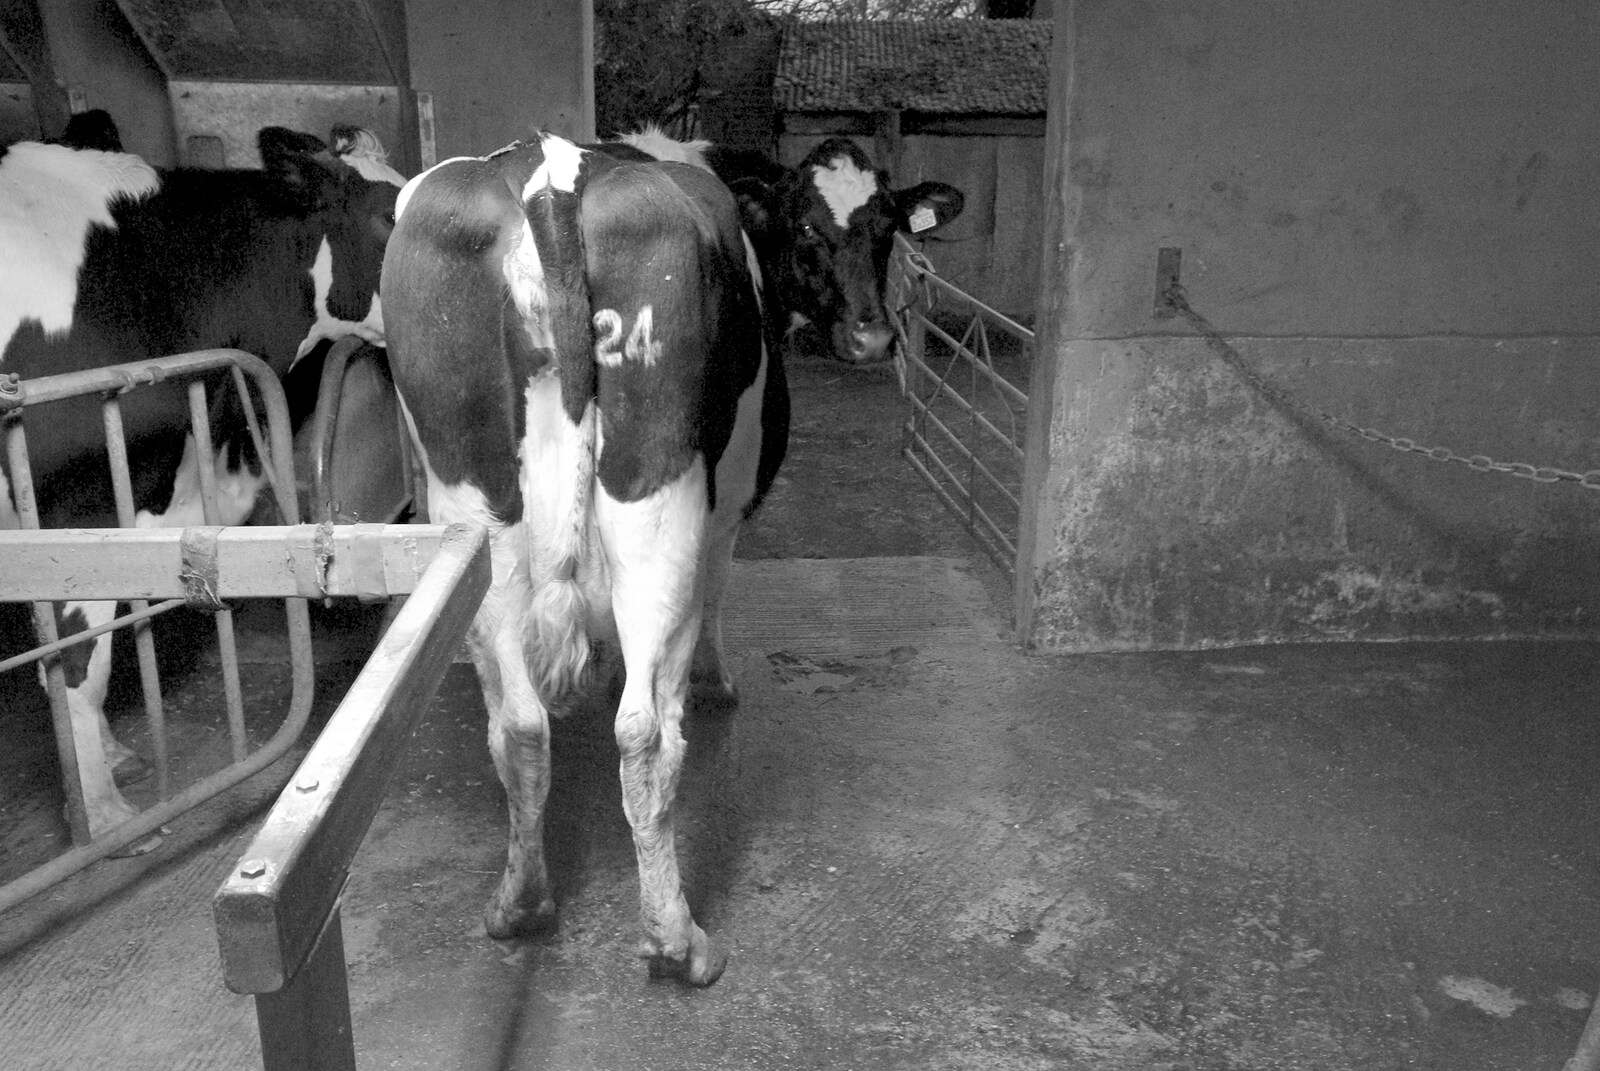 A departing cow looks back from The Last Milking at Dairy Farm, Thrandeston, Suffolk - 11th January 2007